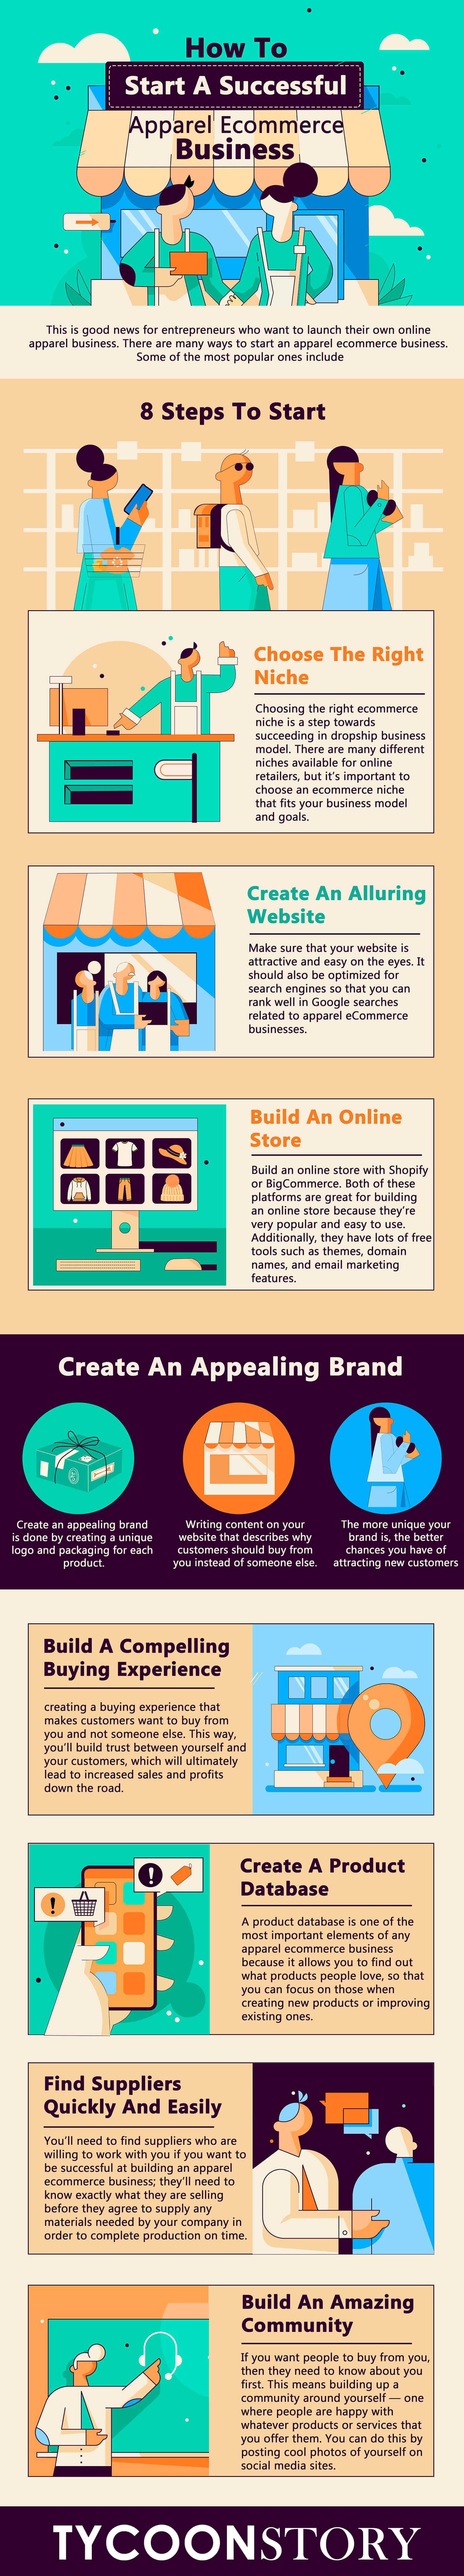 How to start a successful apparel ecommerce business in 2022